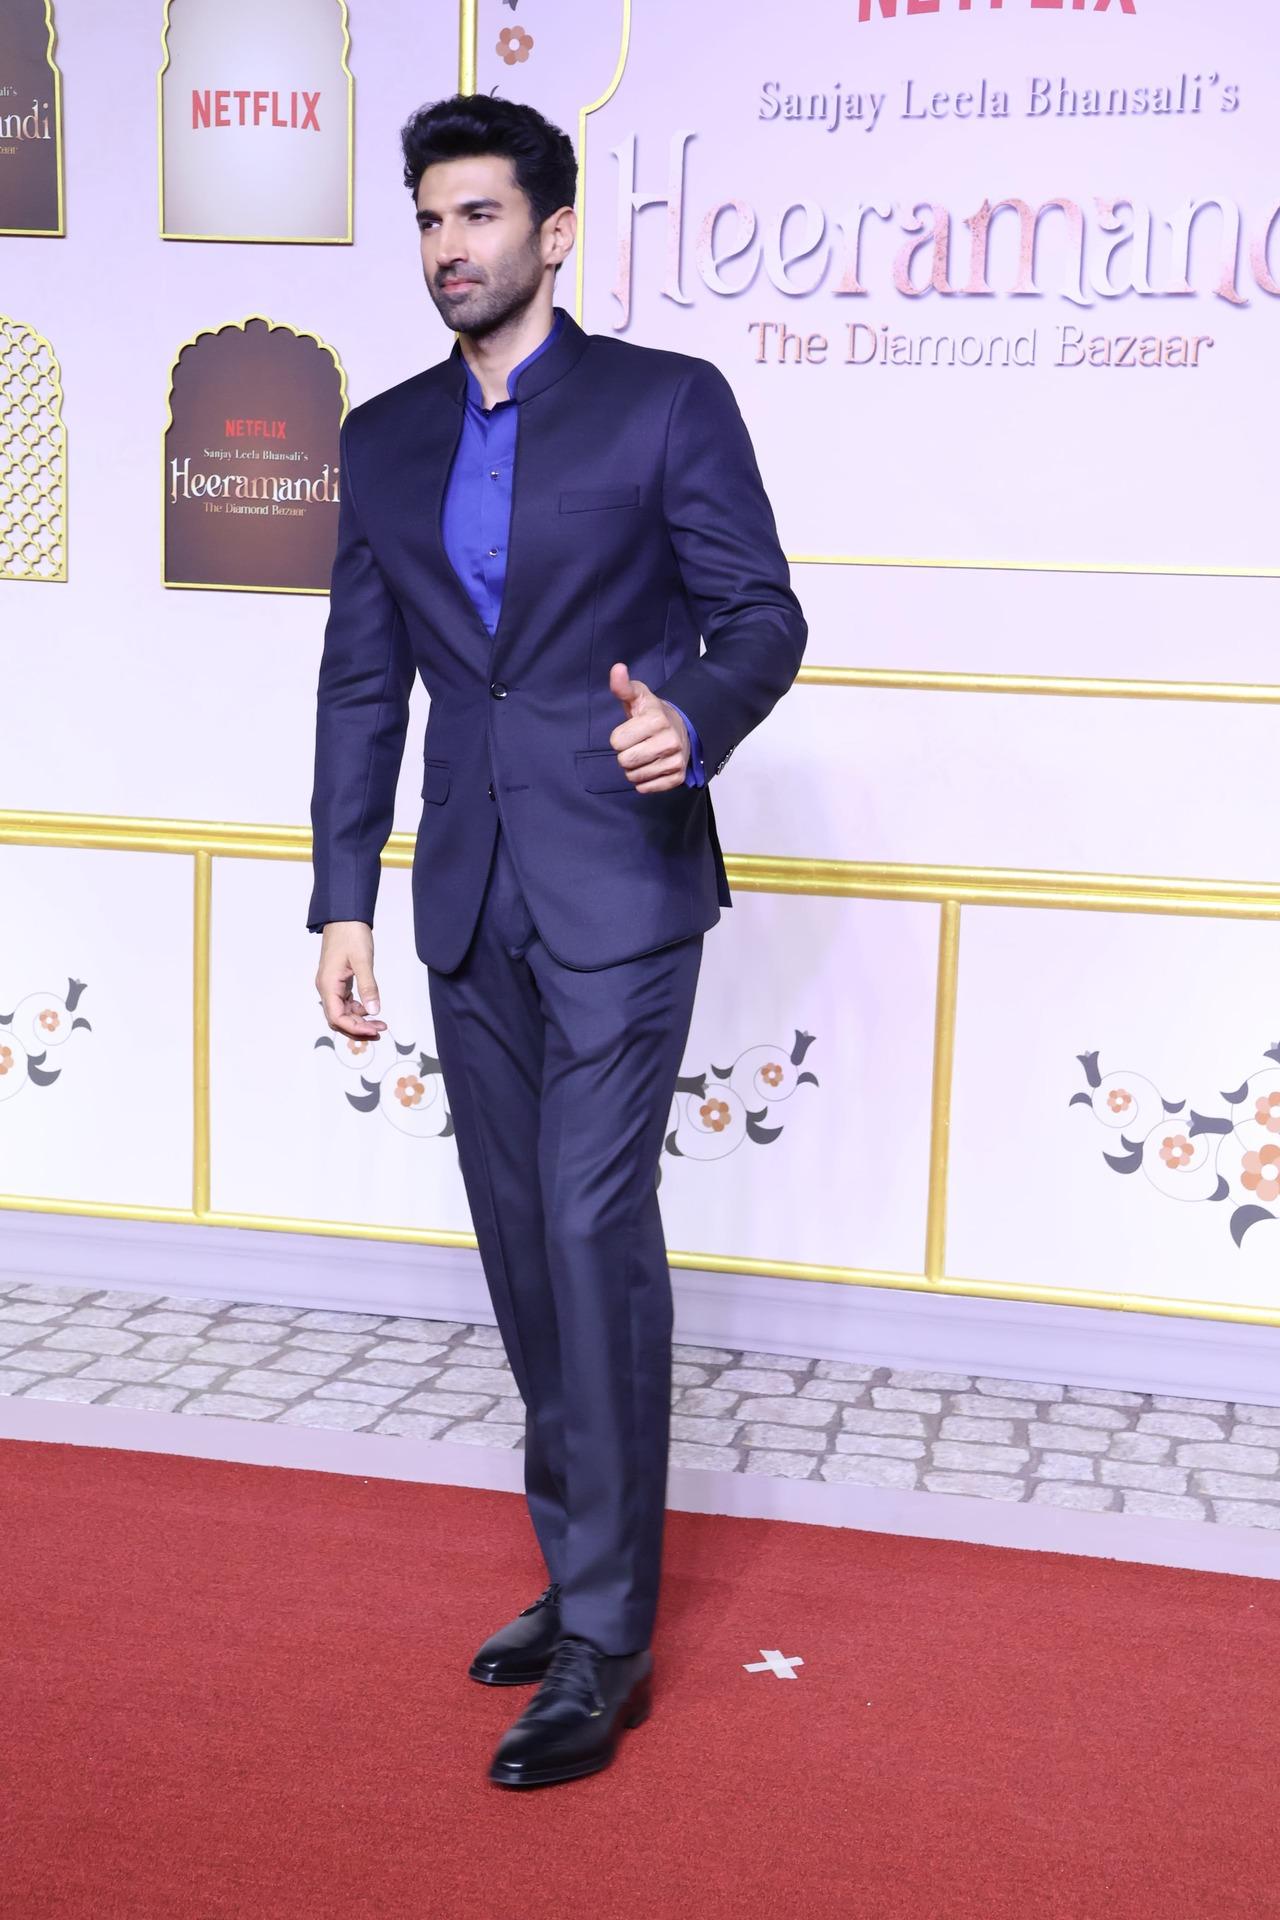 Aditya Roy Kapur looked dapper in a suit for the premiere